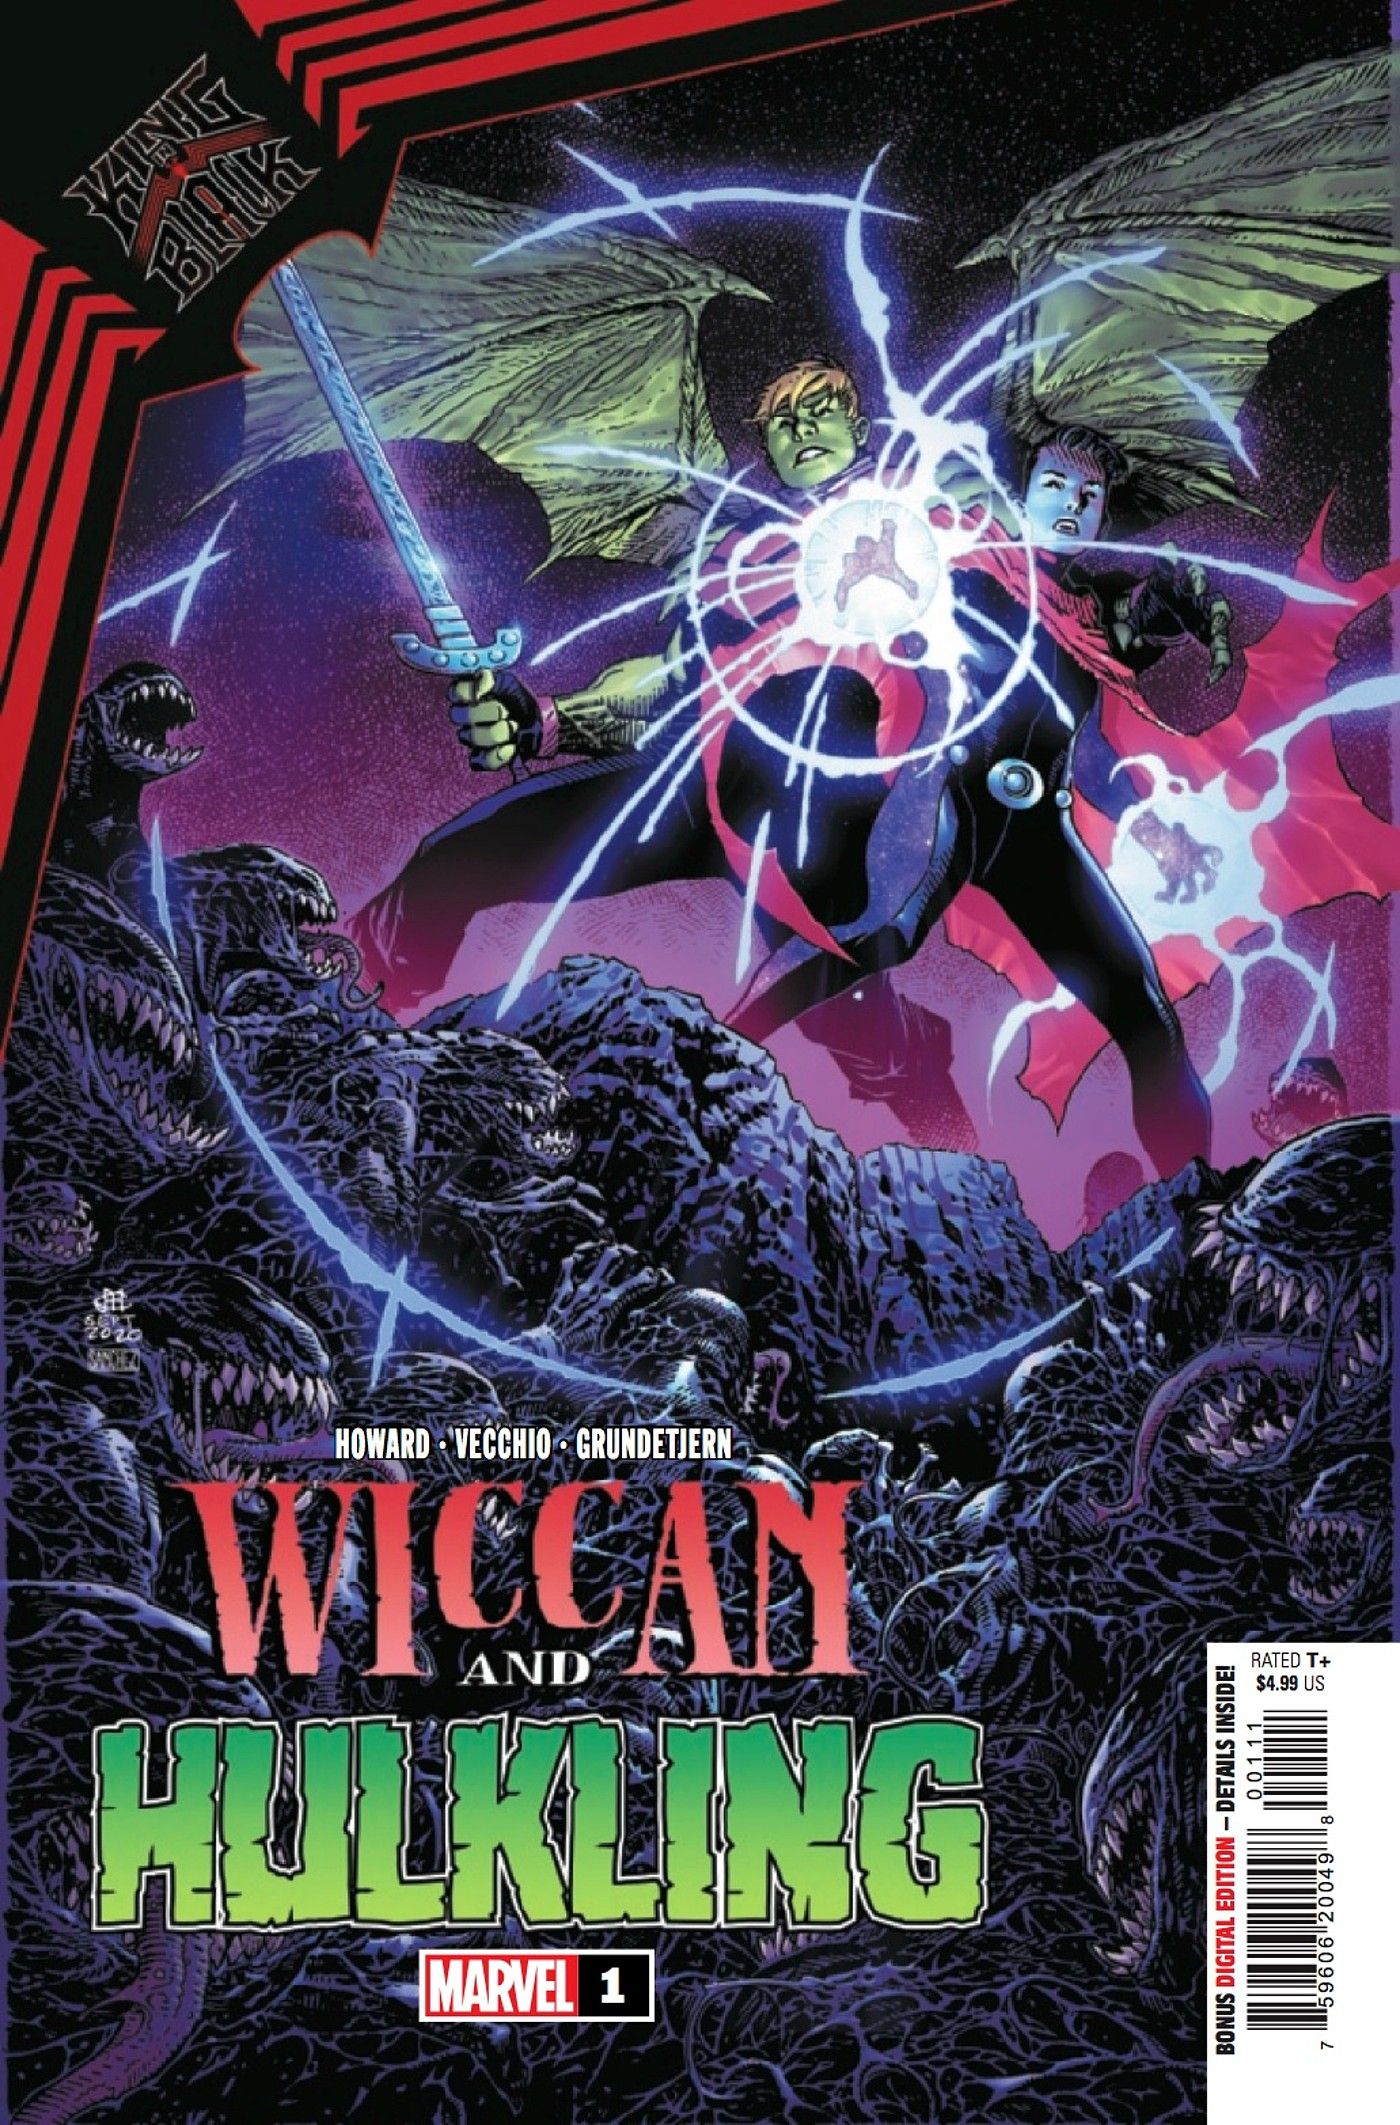 Wiccan Hulkling Kind in Black cover